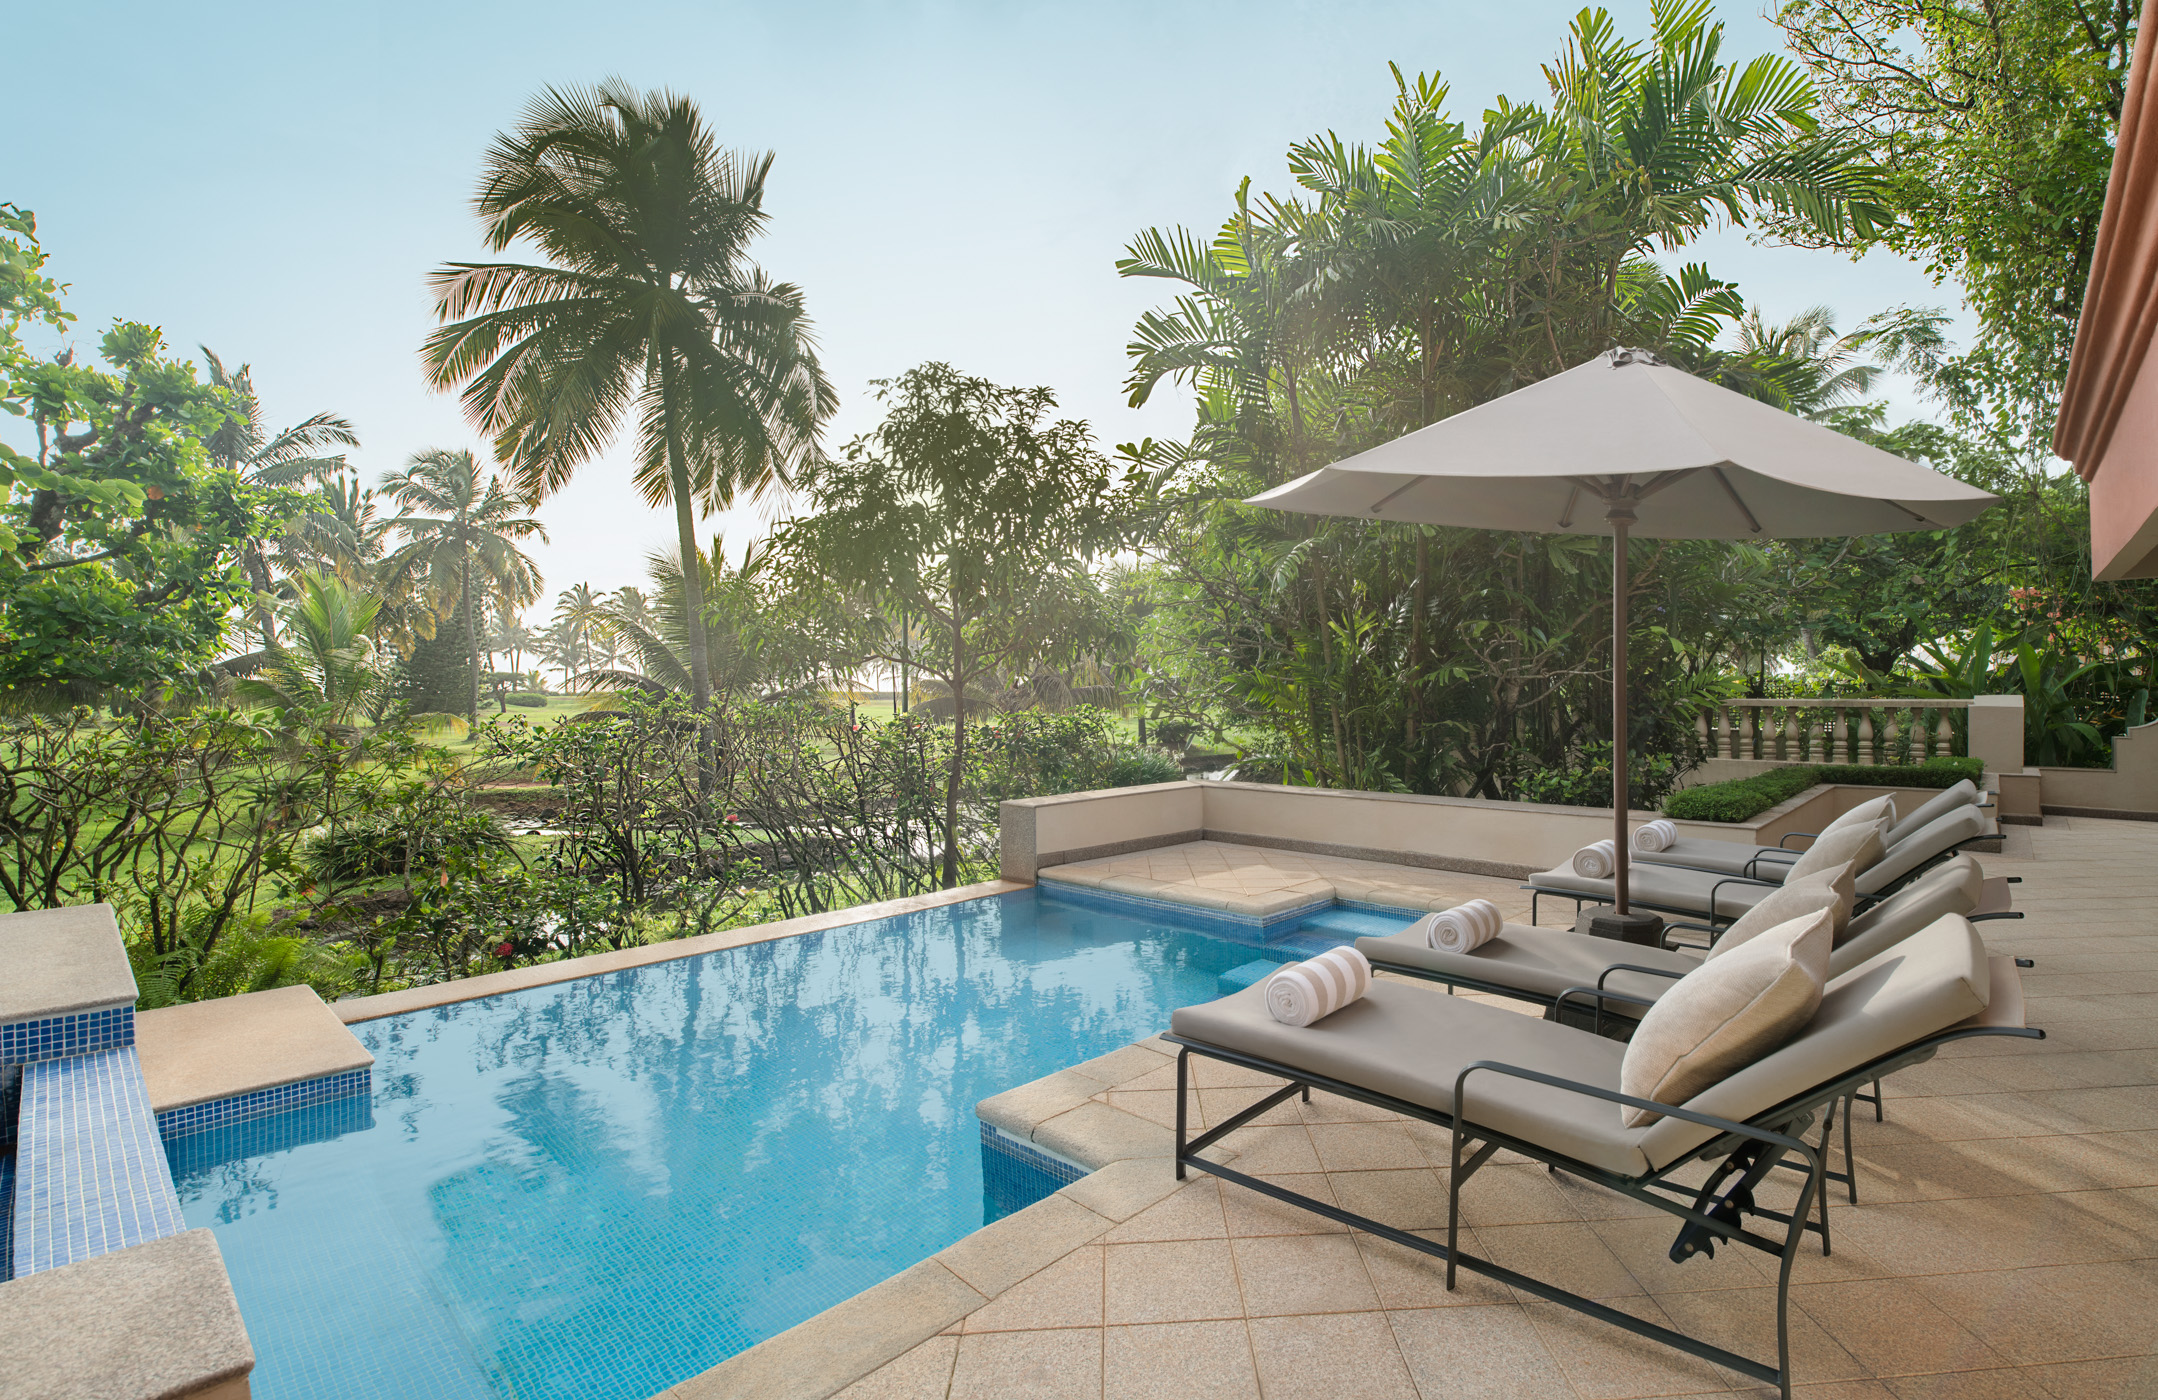 St. Regis Hotels & Resorts Brings Its Storied Heritage To India's Historic Coastal Paradise With Opening Of The St. Regis Goa Resort